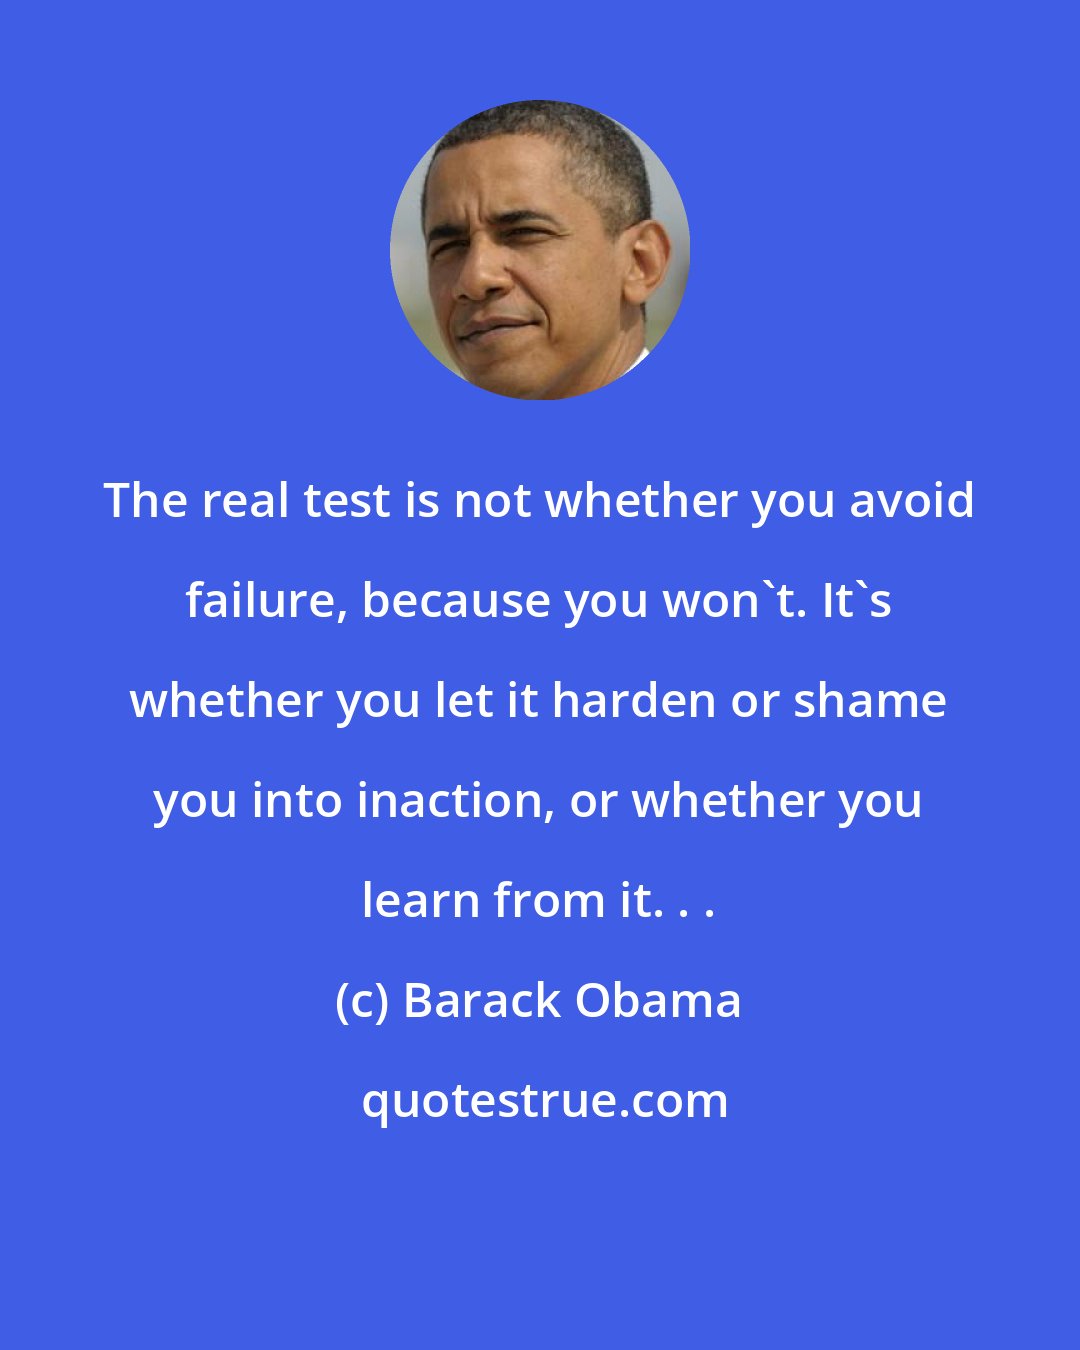 Barack Obama: The real test is not whether you avoid failure, because you won't. It's whether you let it harden or shame you into inaction, or whether you learn from it. . .